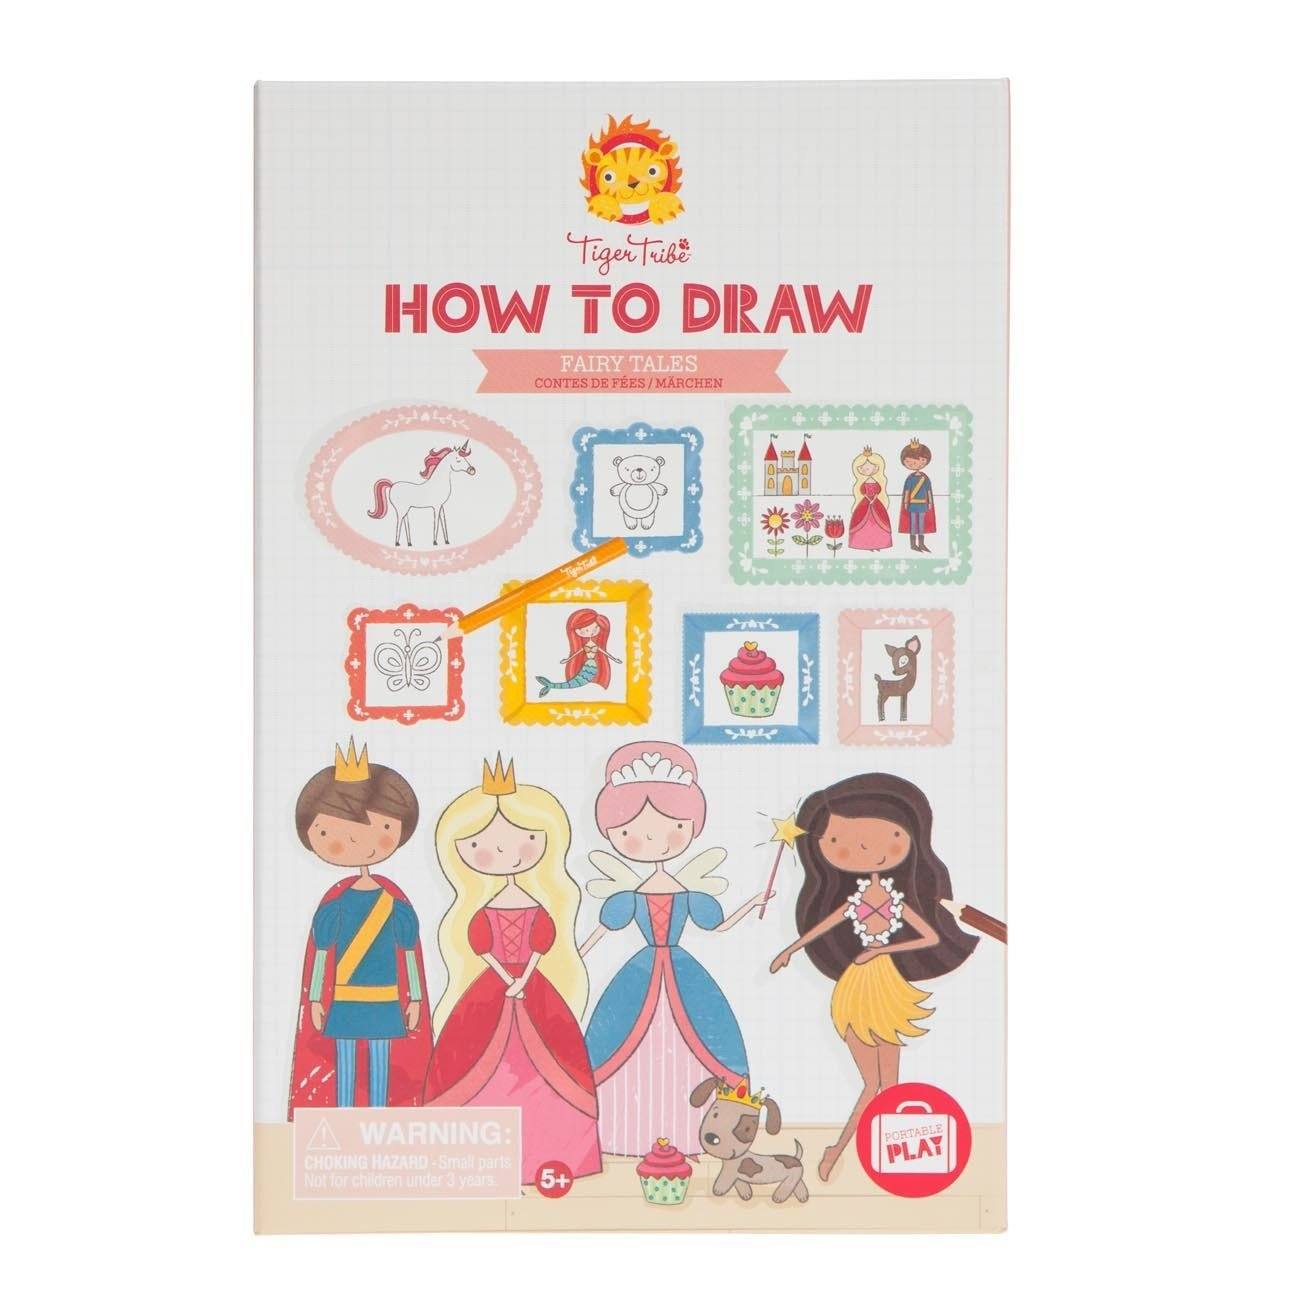 How To Draw (Fairy Tales)